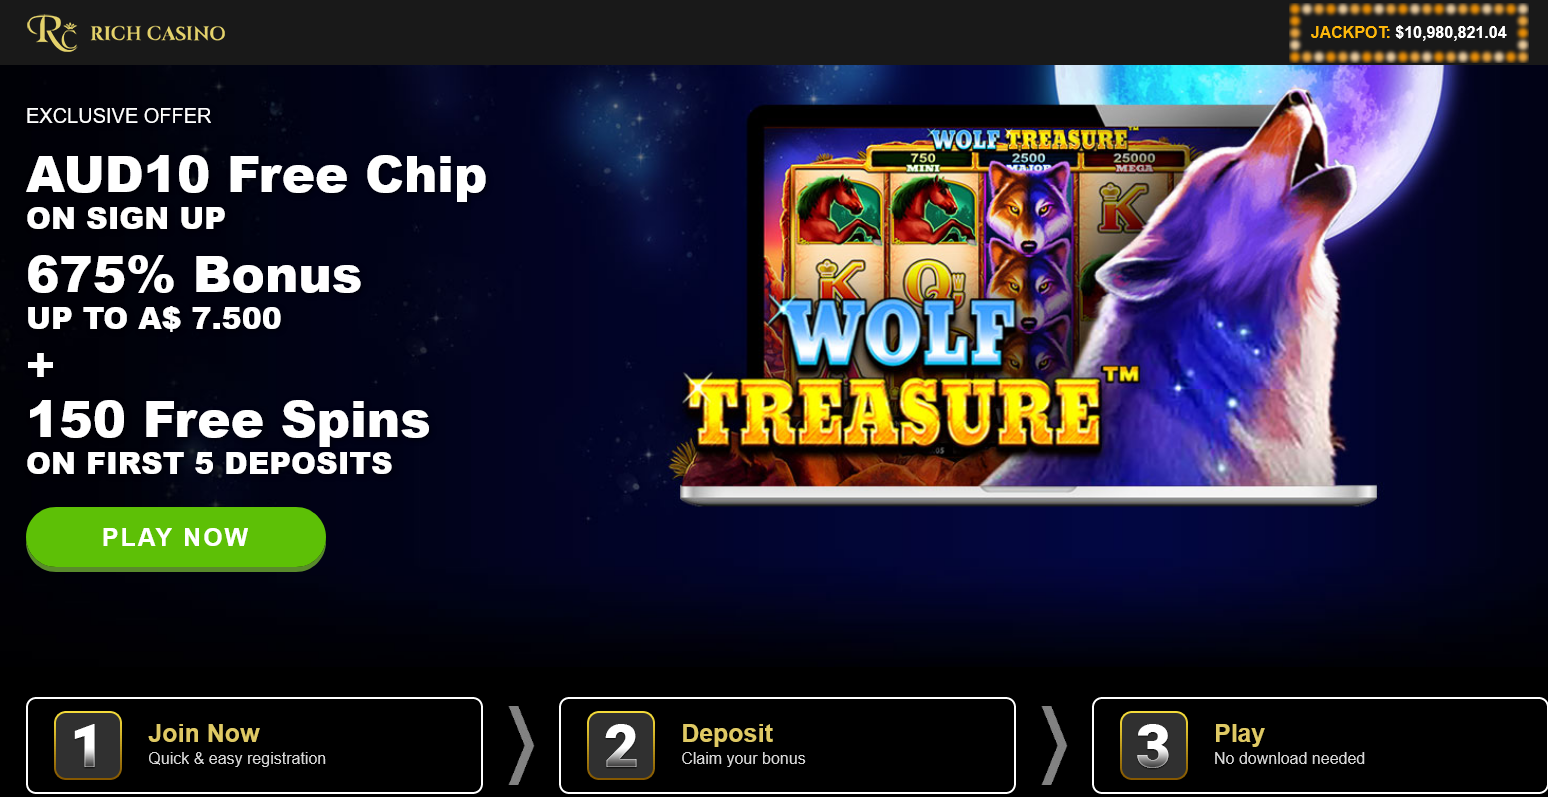 150 Free
                                                          Spins ON FIRST
                                                          5 DEPOSITS